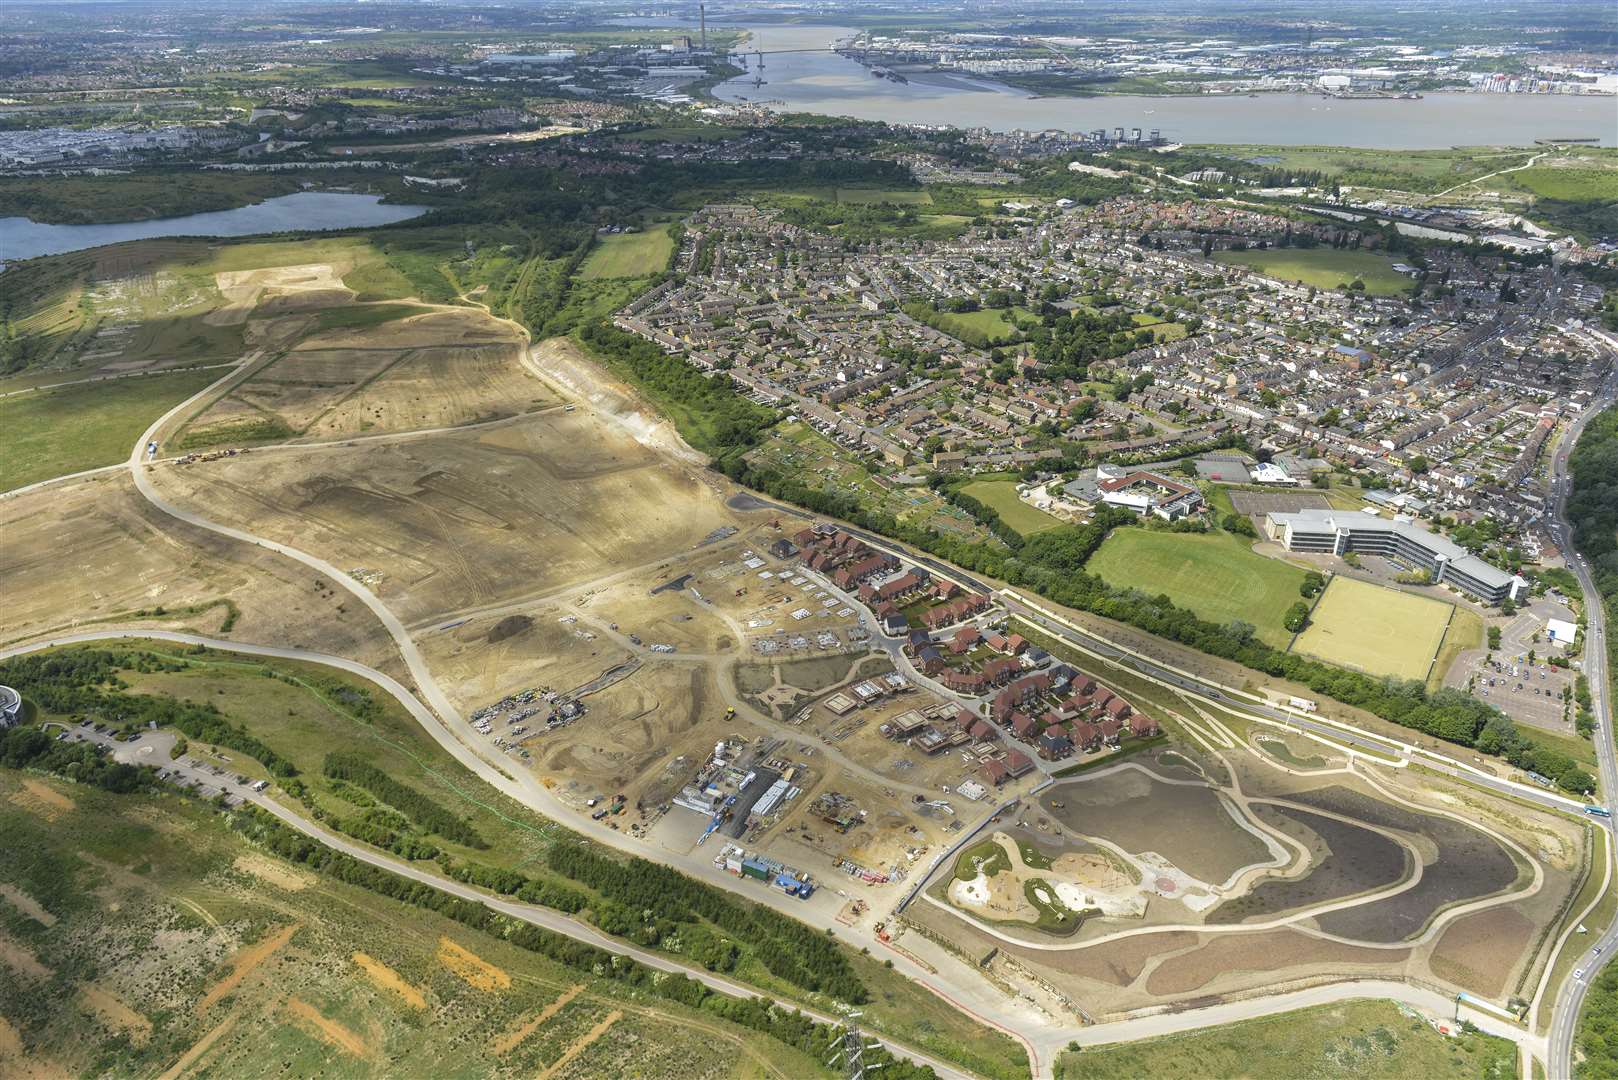 The Eastern Quarry at the planned Ebbsfleet Garden City